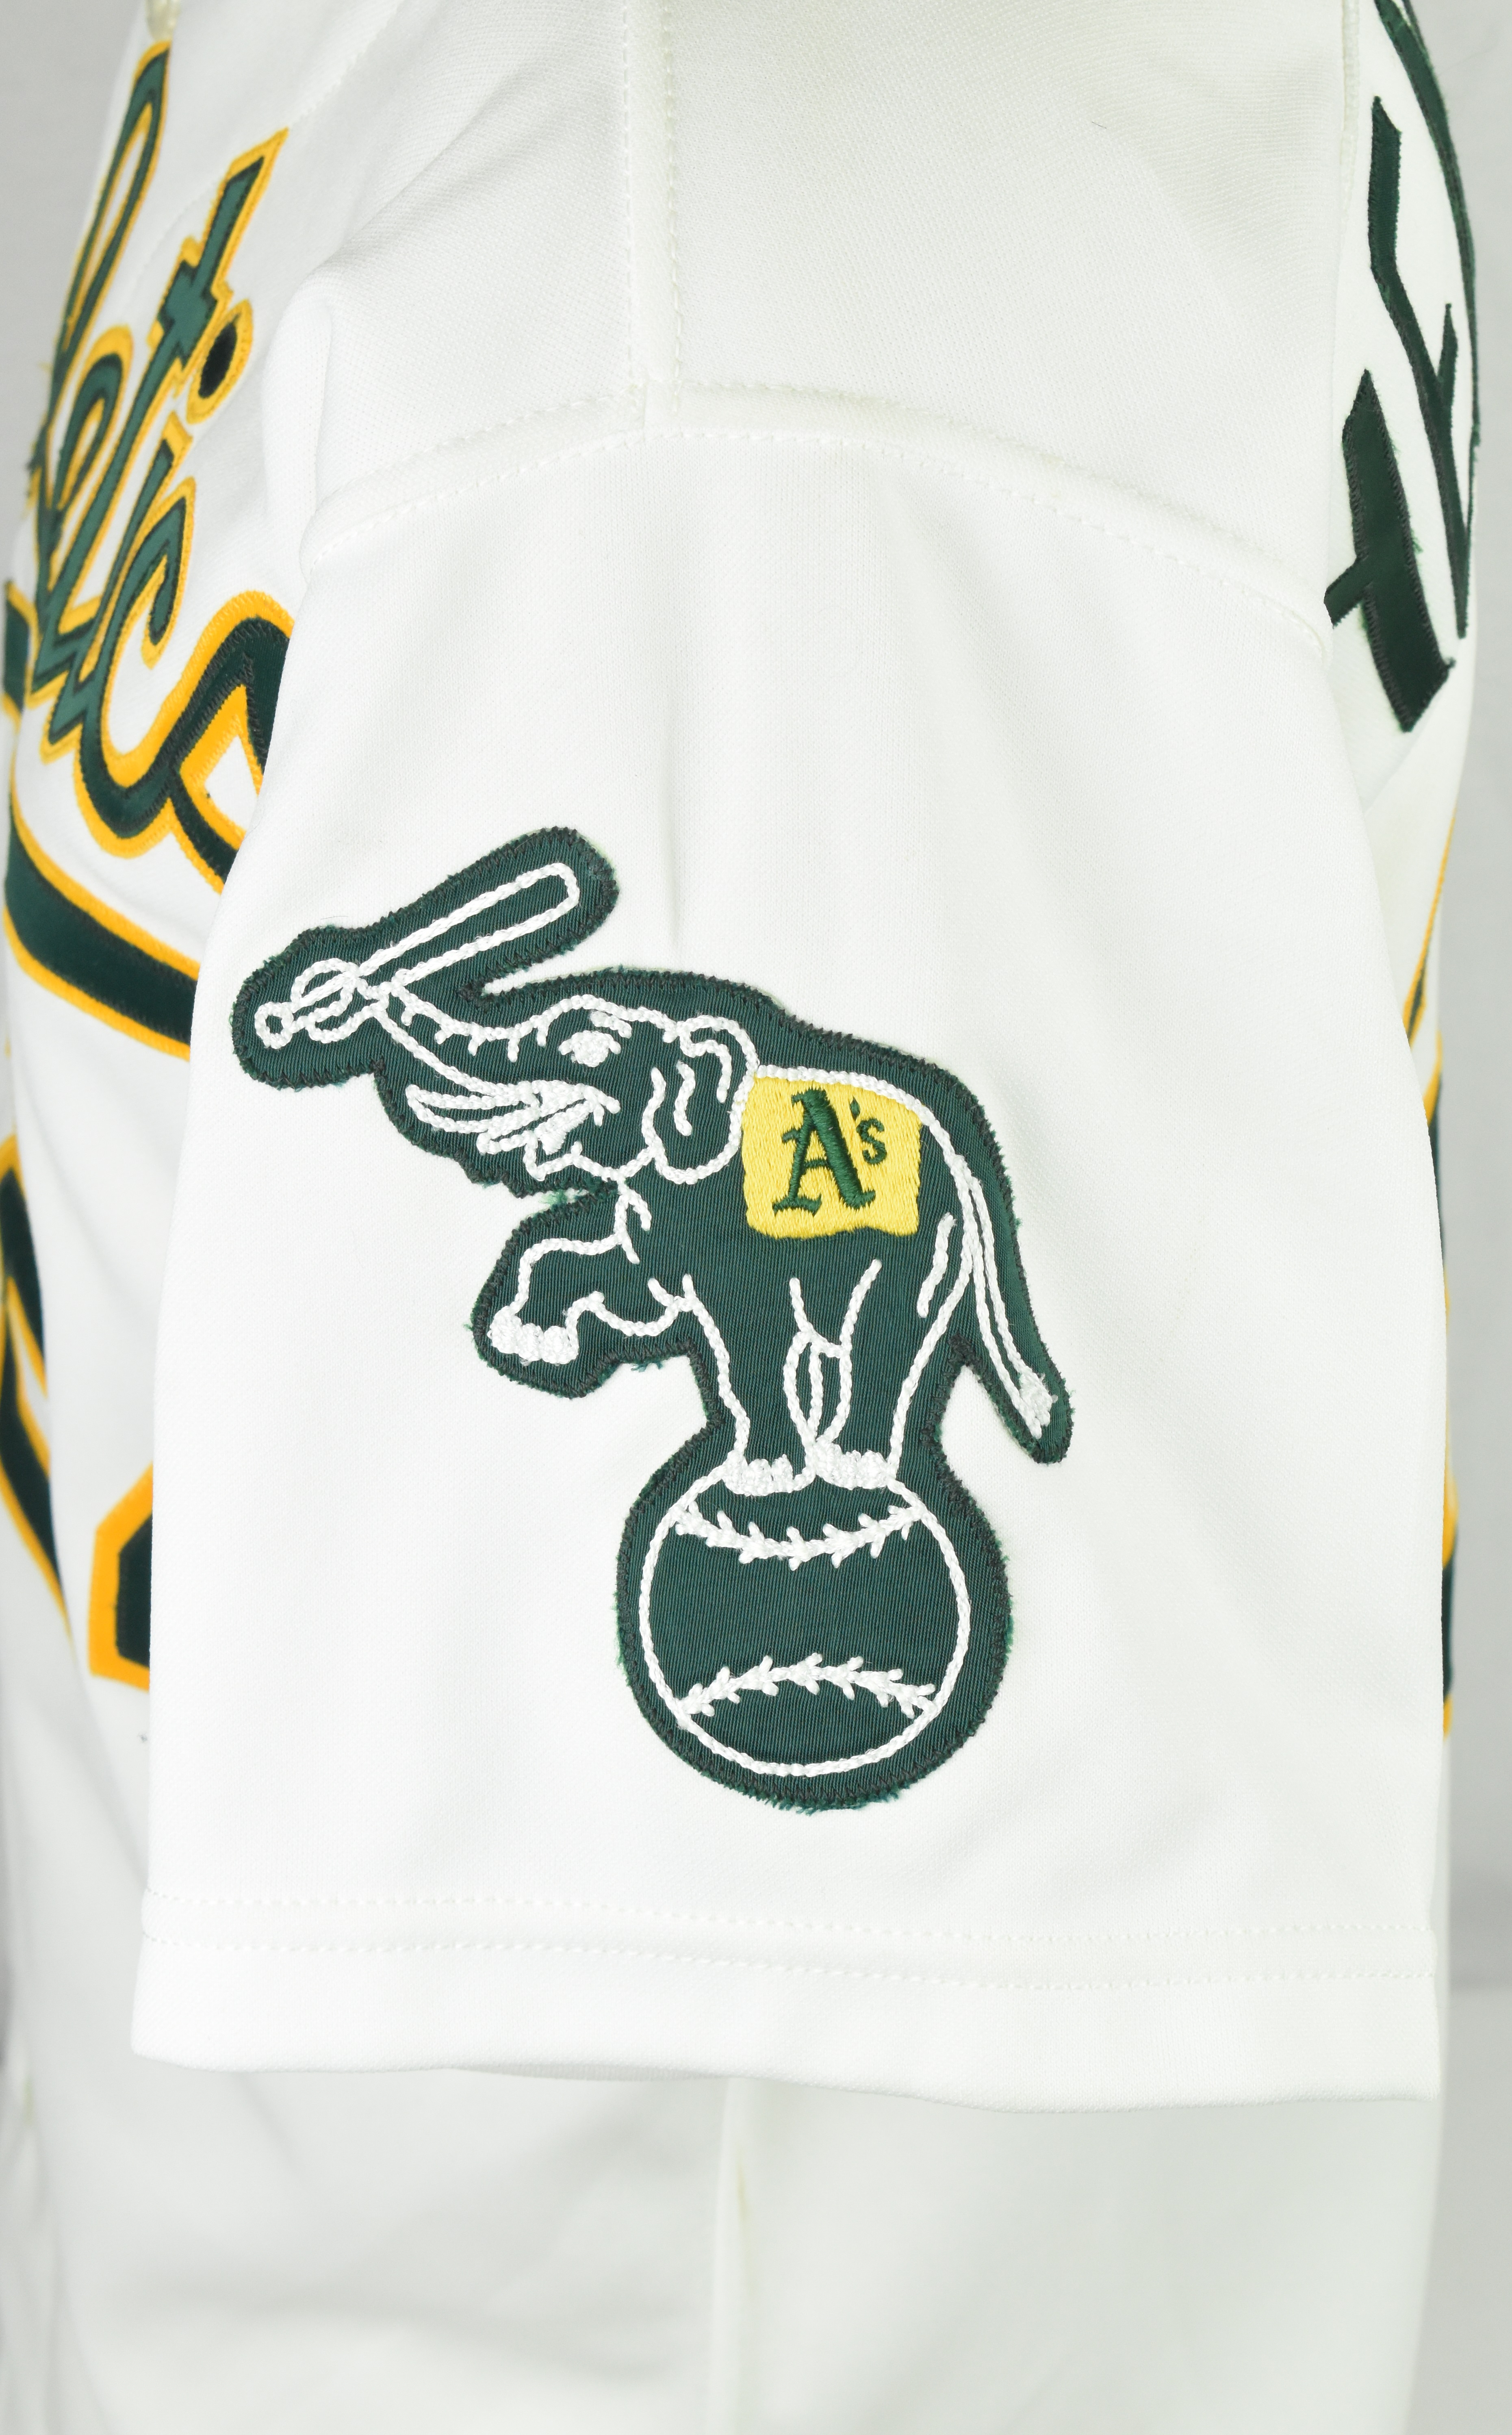 1994 Rickey Henderson Oakland Athletics A's Authentic Russell MLB Jersey  Size 44 – Rare VNTG